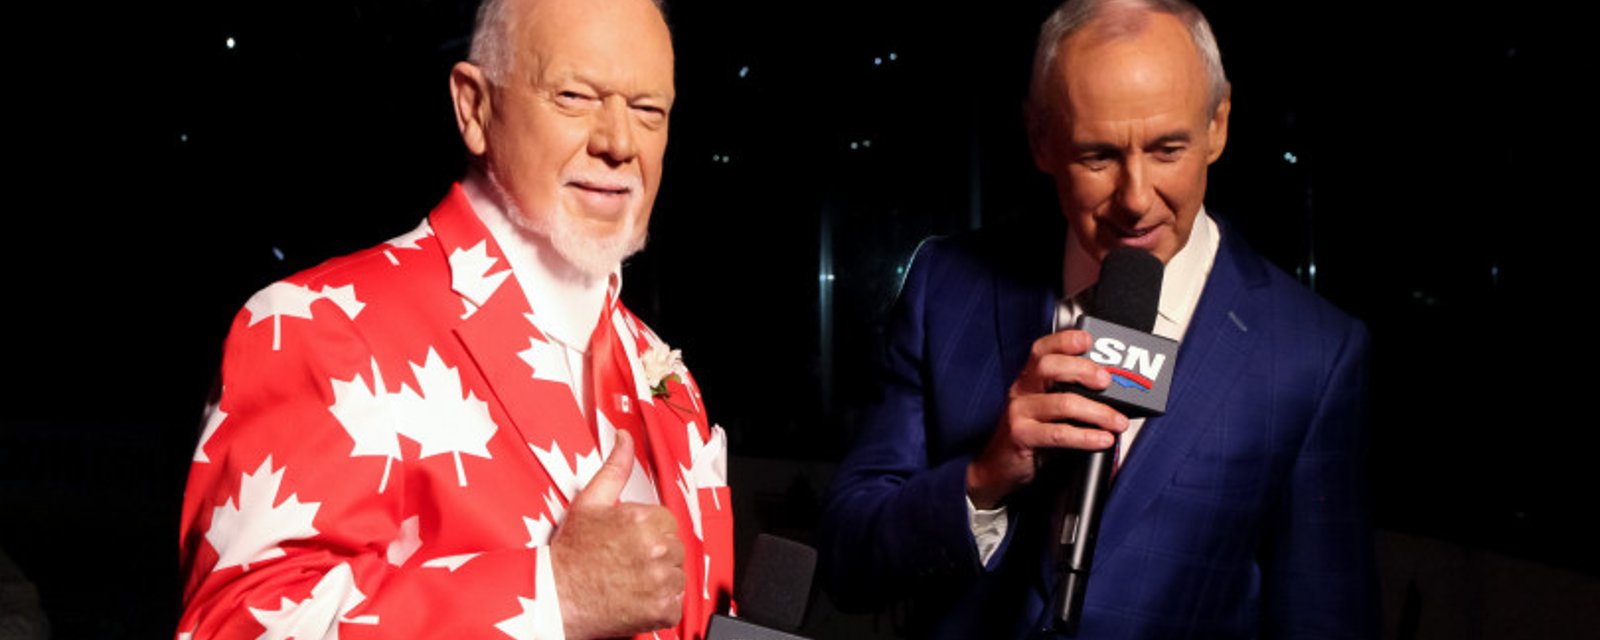 Hockey Night in Canada ratings take major hit since Don Cherry’s firing